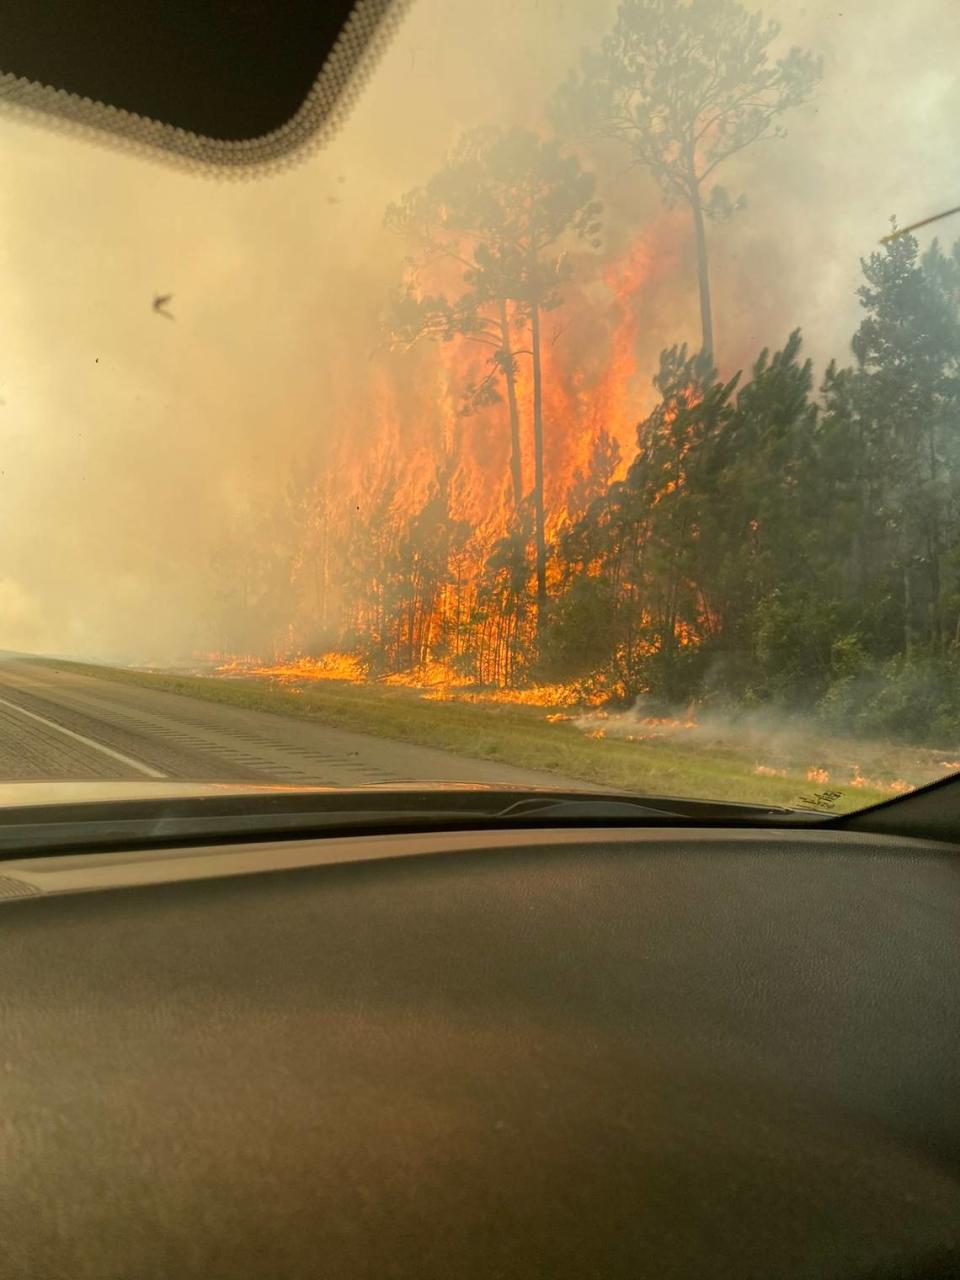 A large grass fire burns at the 2 mile-marker on I-10 in Hancock County on Friday, Aug. 10, 2023. The Interstate has been shut down for safety reasons. Mississippi Highway Patrol